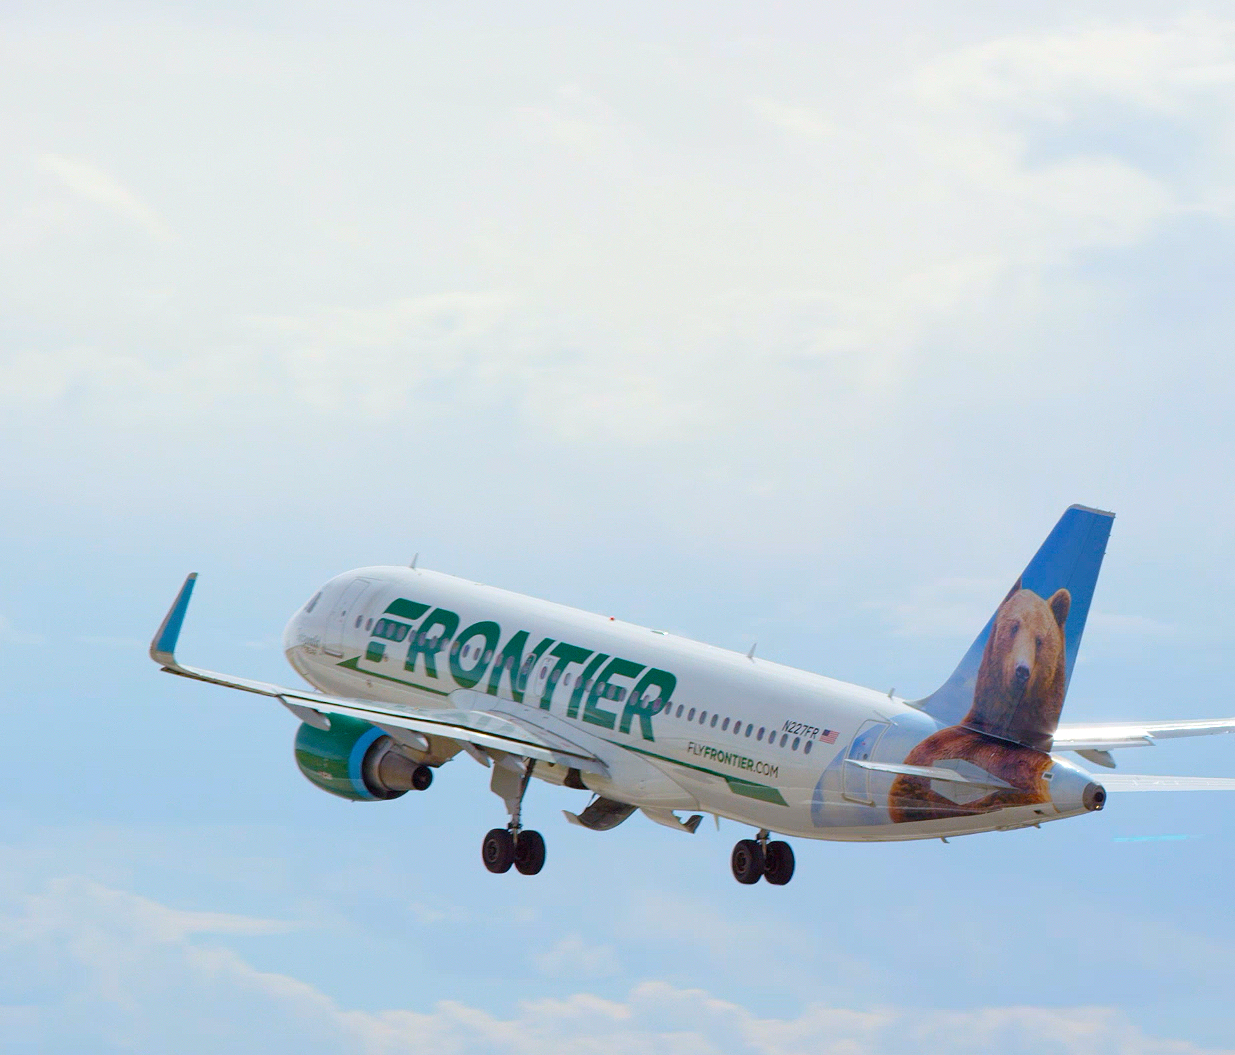 Frontier Airlines to inaugurate  service to Punta Gorda Airport in the fall, joining Allegiant Air at the airport 20 miles north of Fort Myers, Florida.